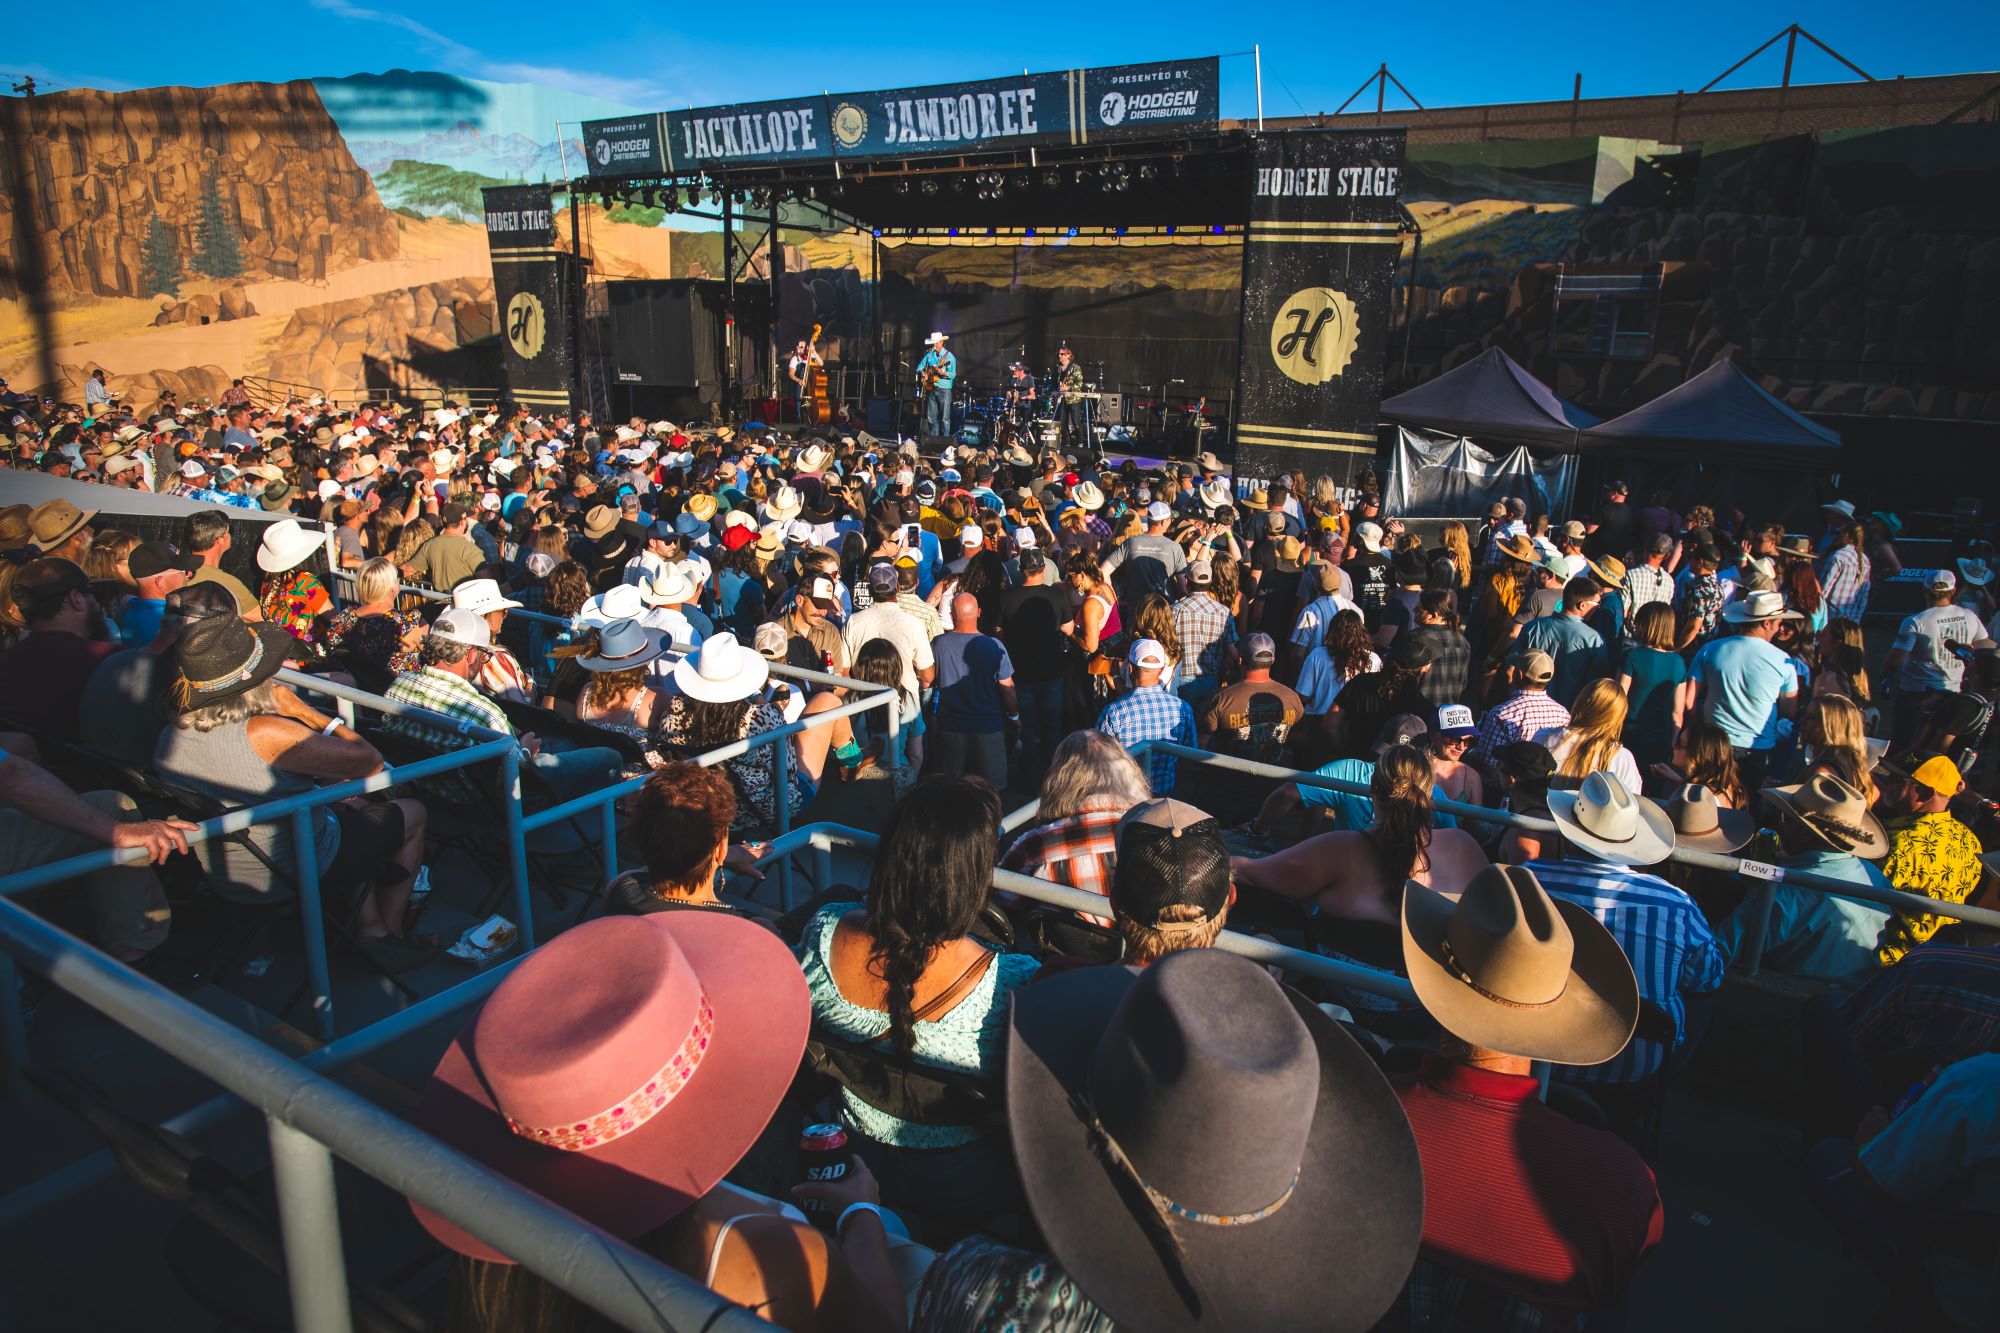 concert-goers attend the Jackalope Jamboree at Happy Canyon